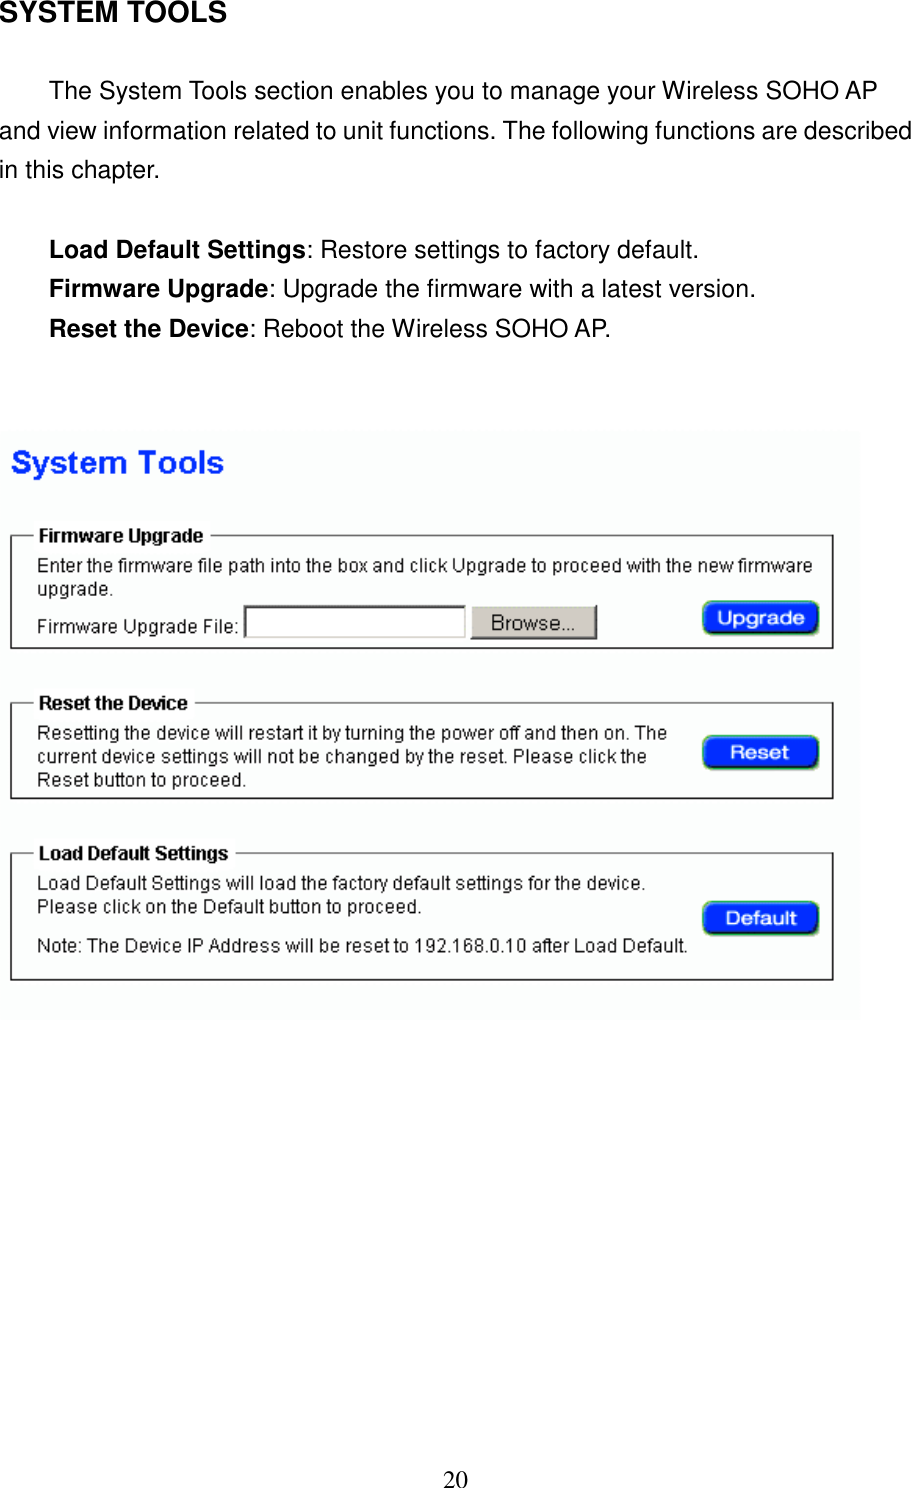 20  SYSTEM TOOLSThe System Tools section enables you to manage your Wireless SOHO APand view information related to unit functions. The following functions are describedin this chapter.Load Default Settings: Restore settings to factory default.Firmware Upgrade: Upgrade the firmware with a latest version.Reset the Device: Reboot the Wireless SOHO AP.